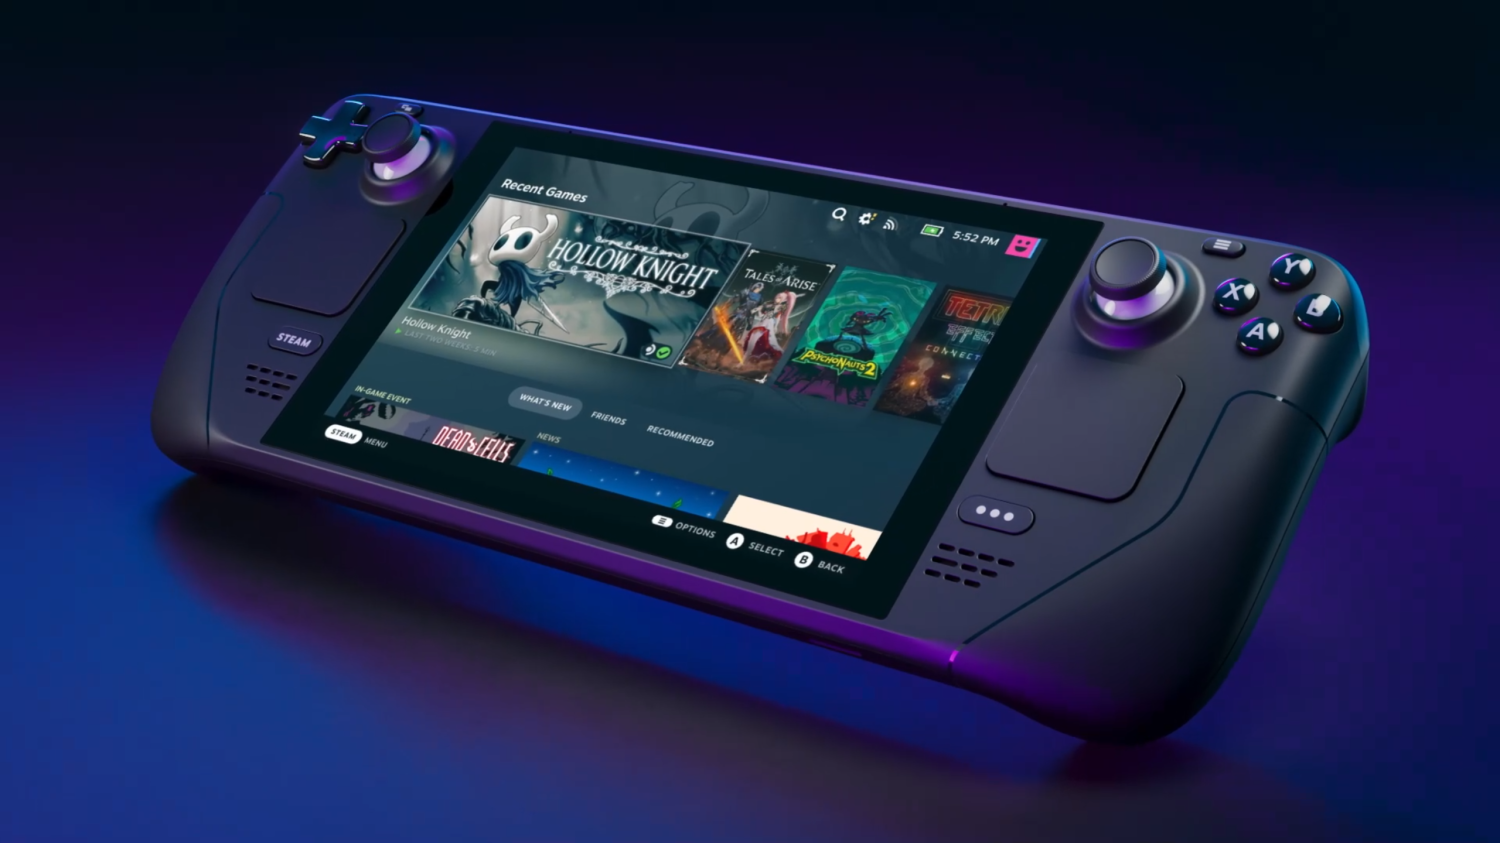 Steam Deck: Everything We Know About Valve's Handheld Gaming PC - IGN